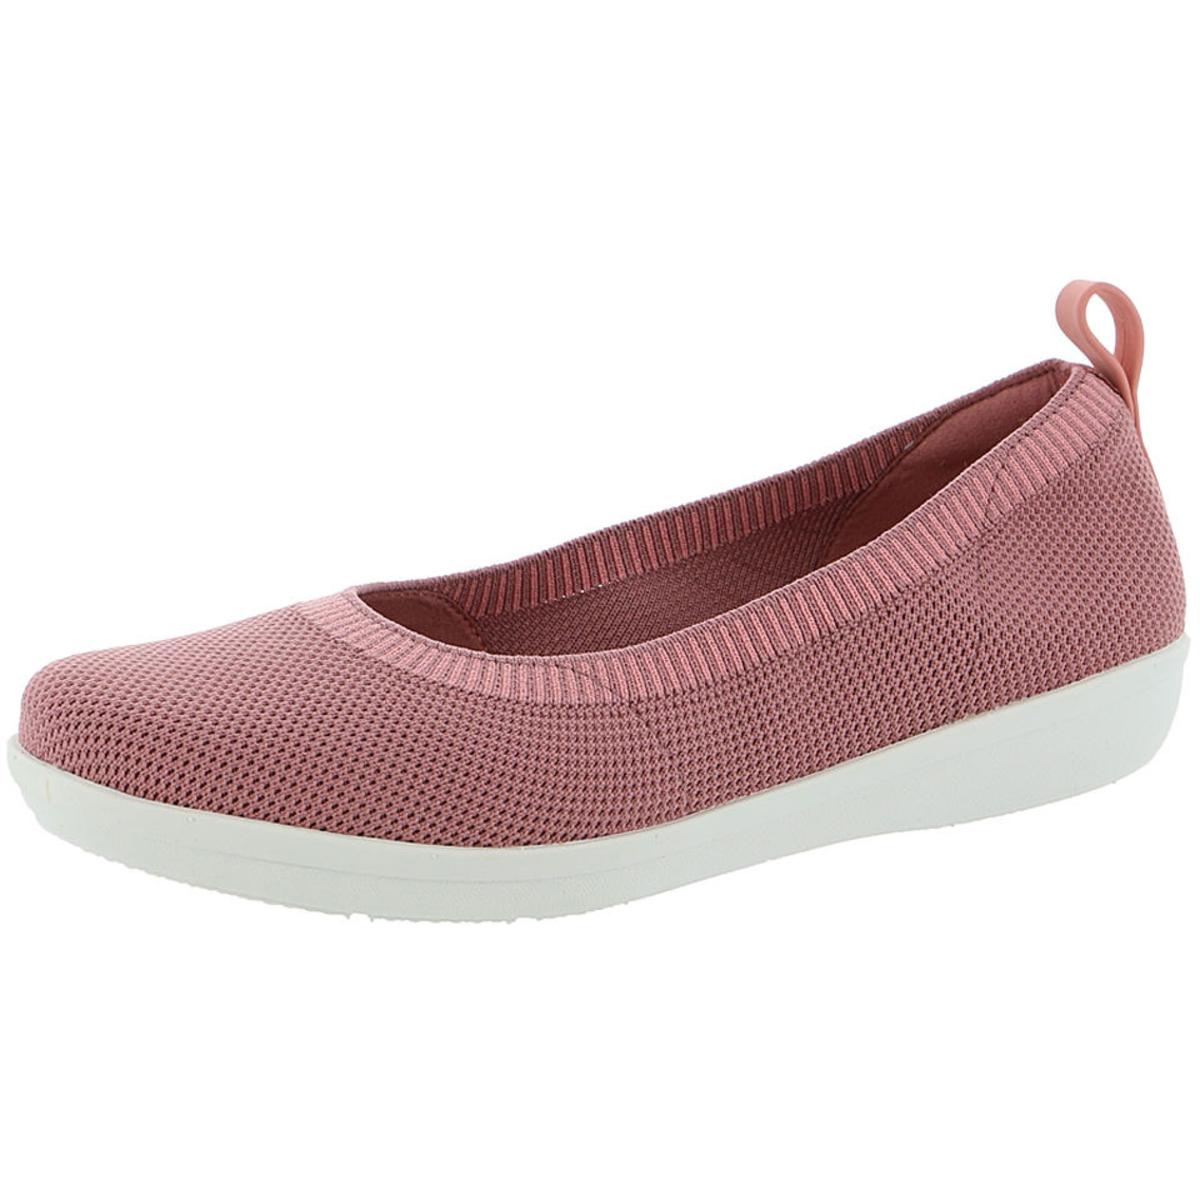 Clarks Womens Ayla Paige Pink Slip-On Sneakers Shoes 9.5 Wide (C,D,W ...